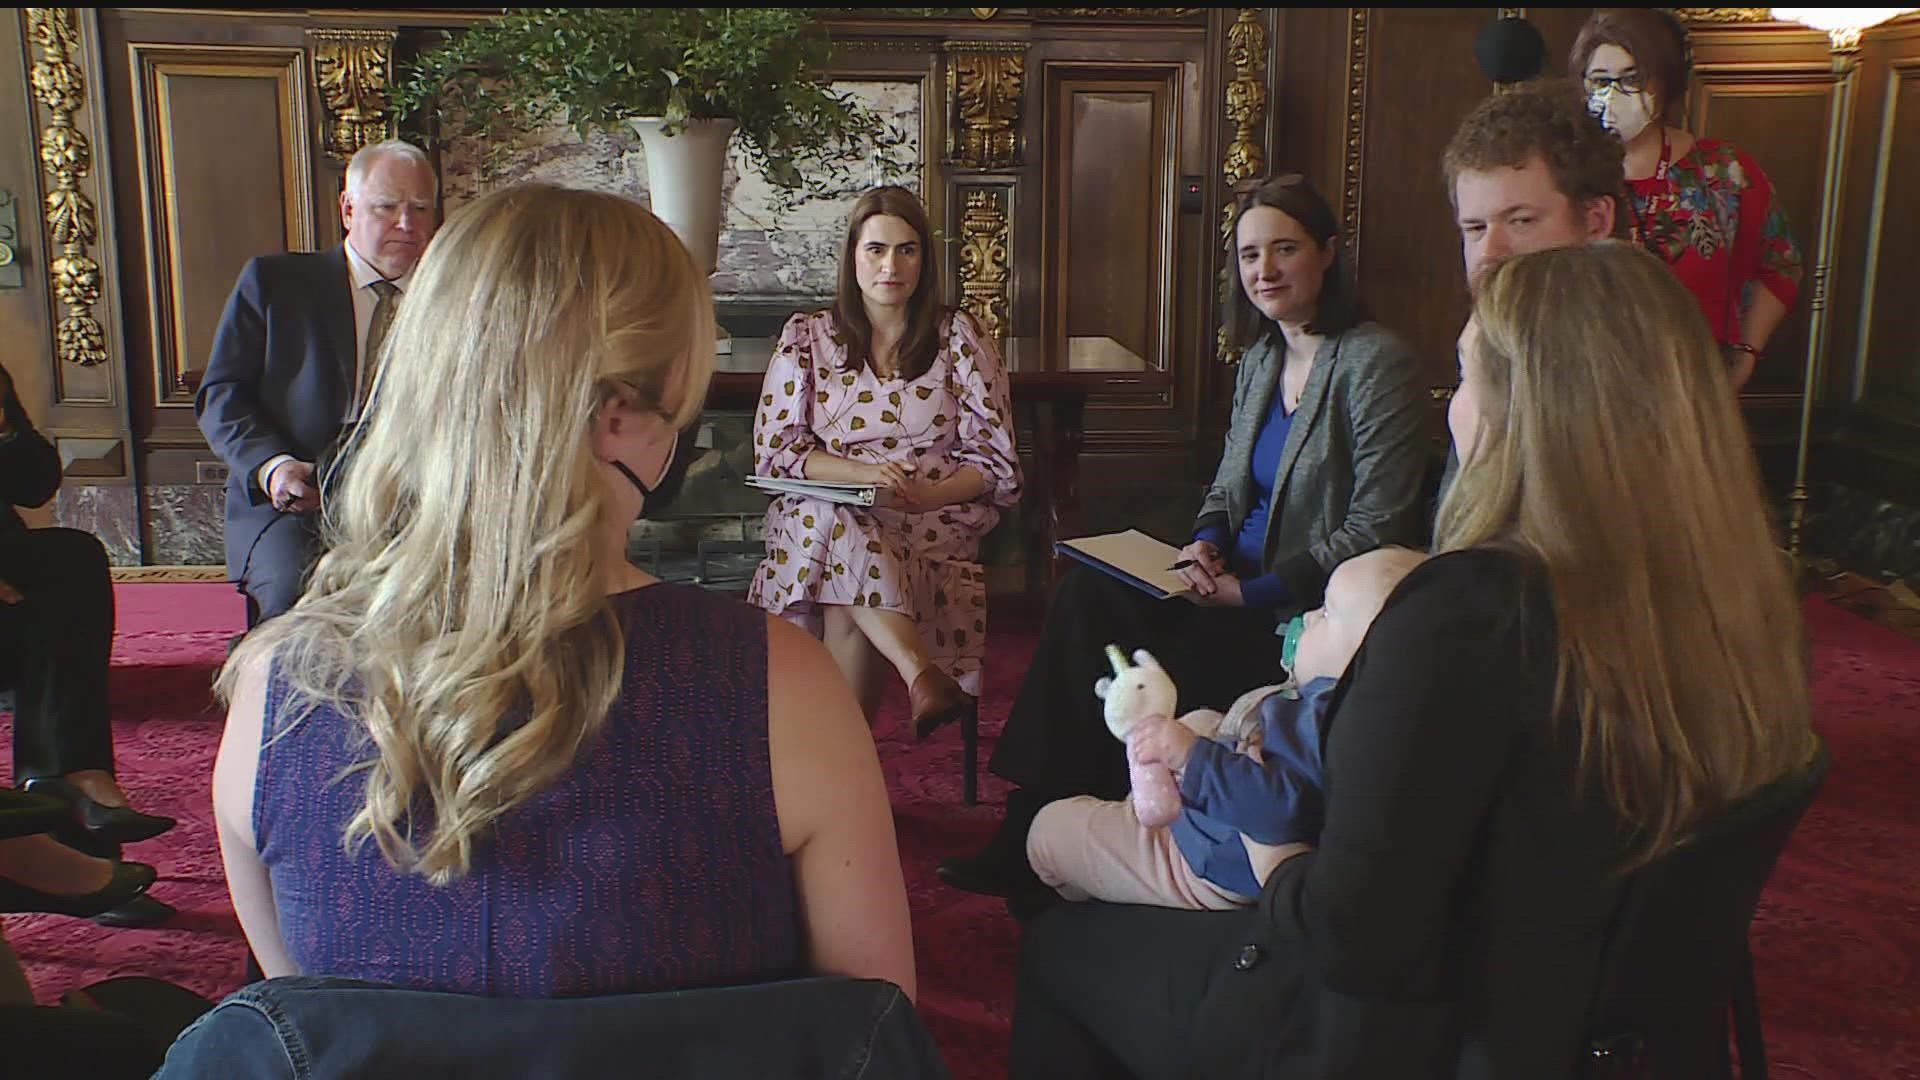 Gov. Walz and Lt. Gov. Flanagan held a discussion with local parents, health leaders and retailers to find solutions amid a nationwide baby formula shortage.